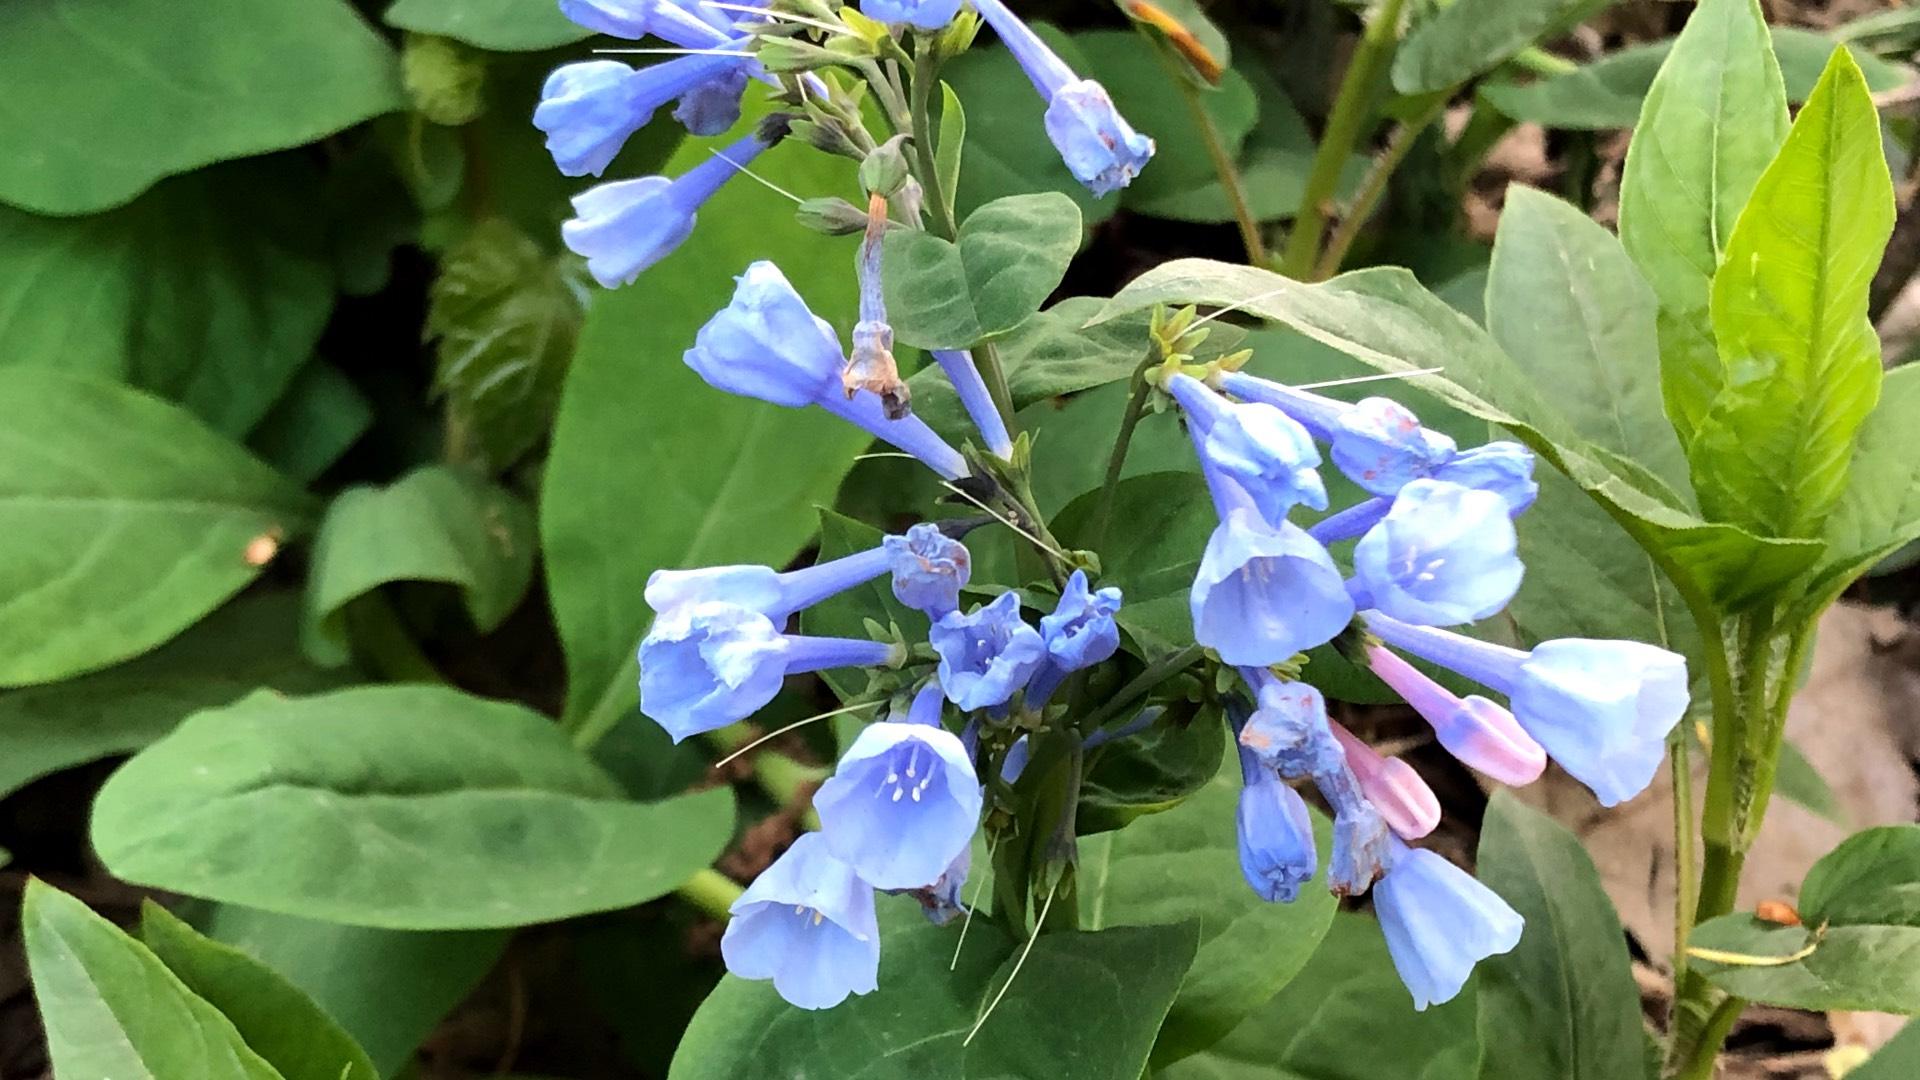 Virginia bluebells were among the species most commonly recorded by Chicagoans during the 2021 City Nature Challenge. (Patty Wetli / WTTW News)